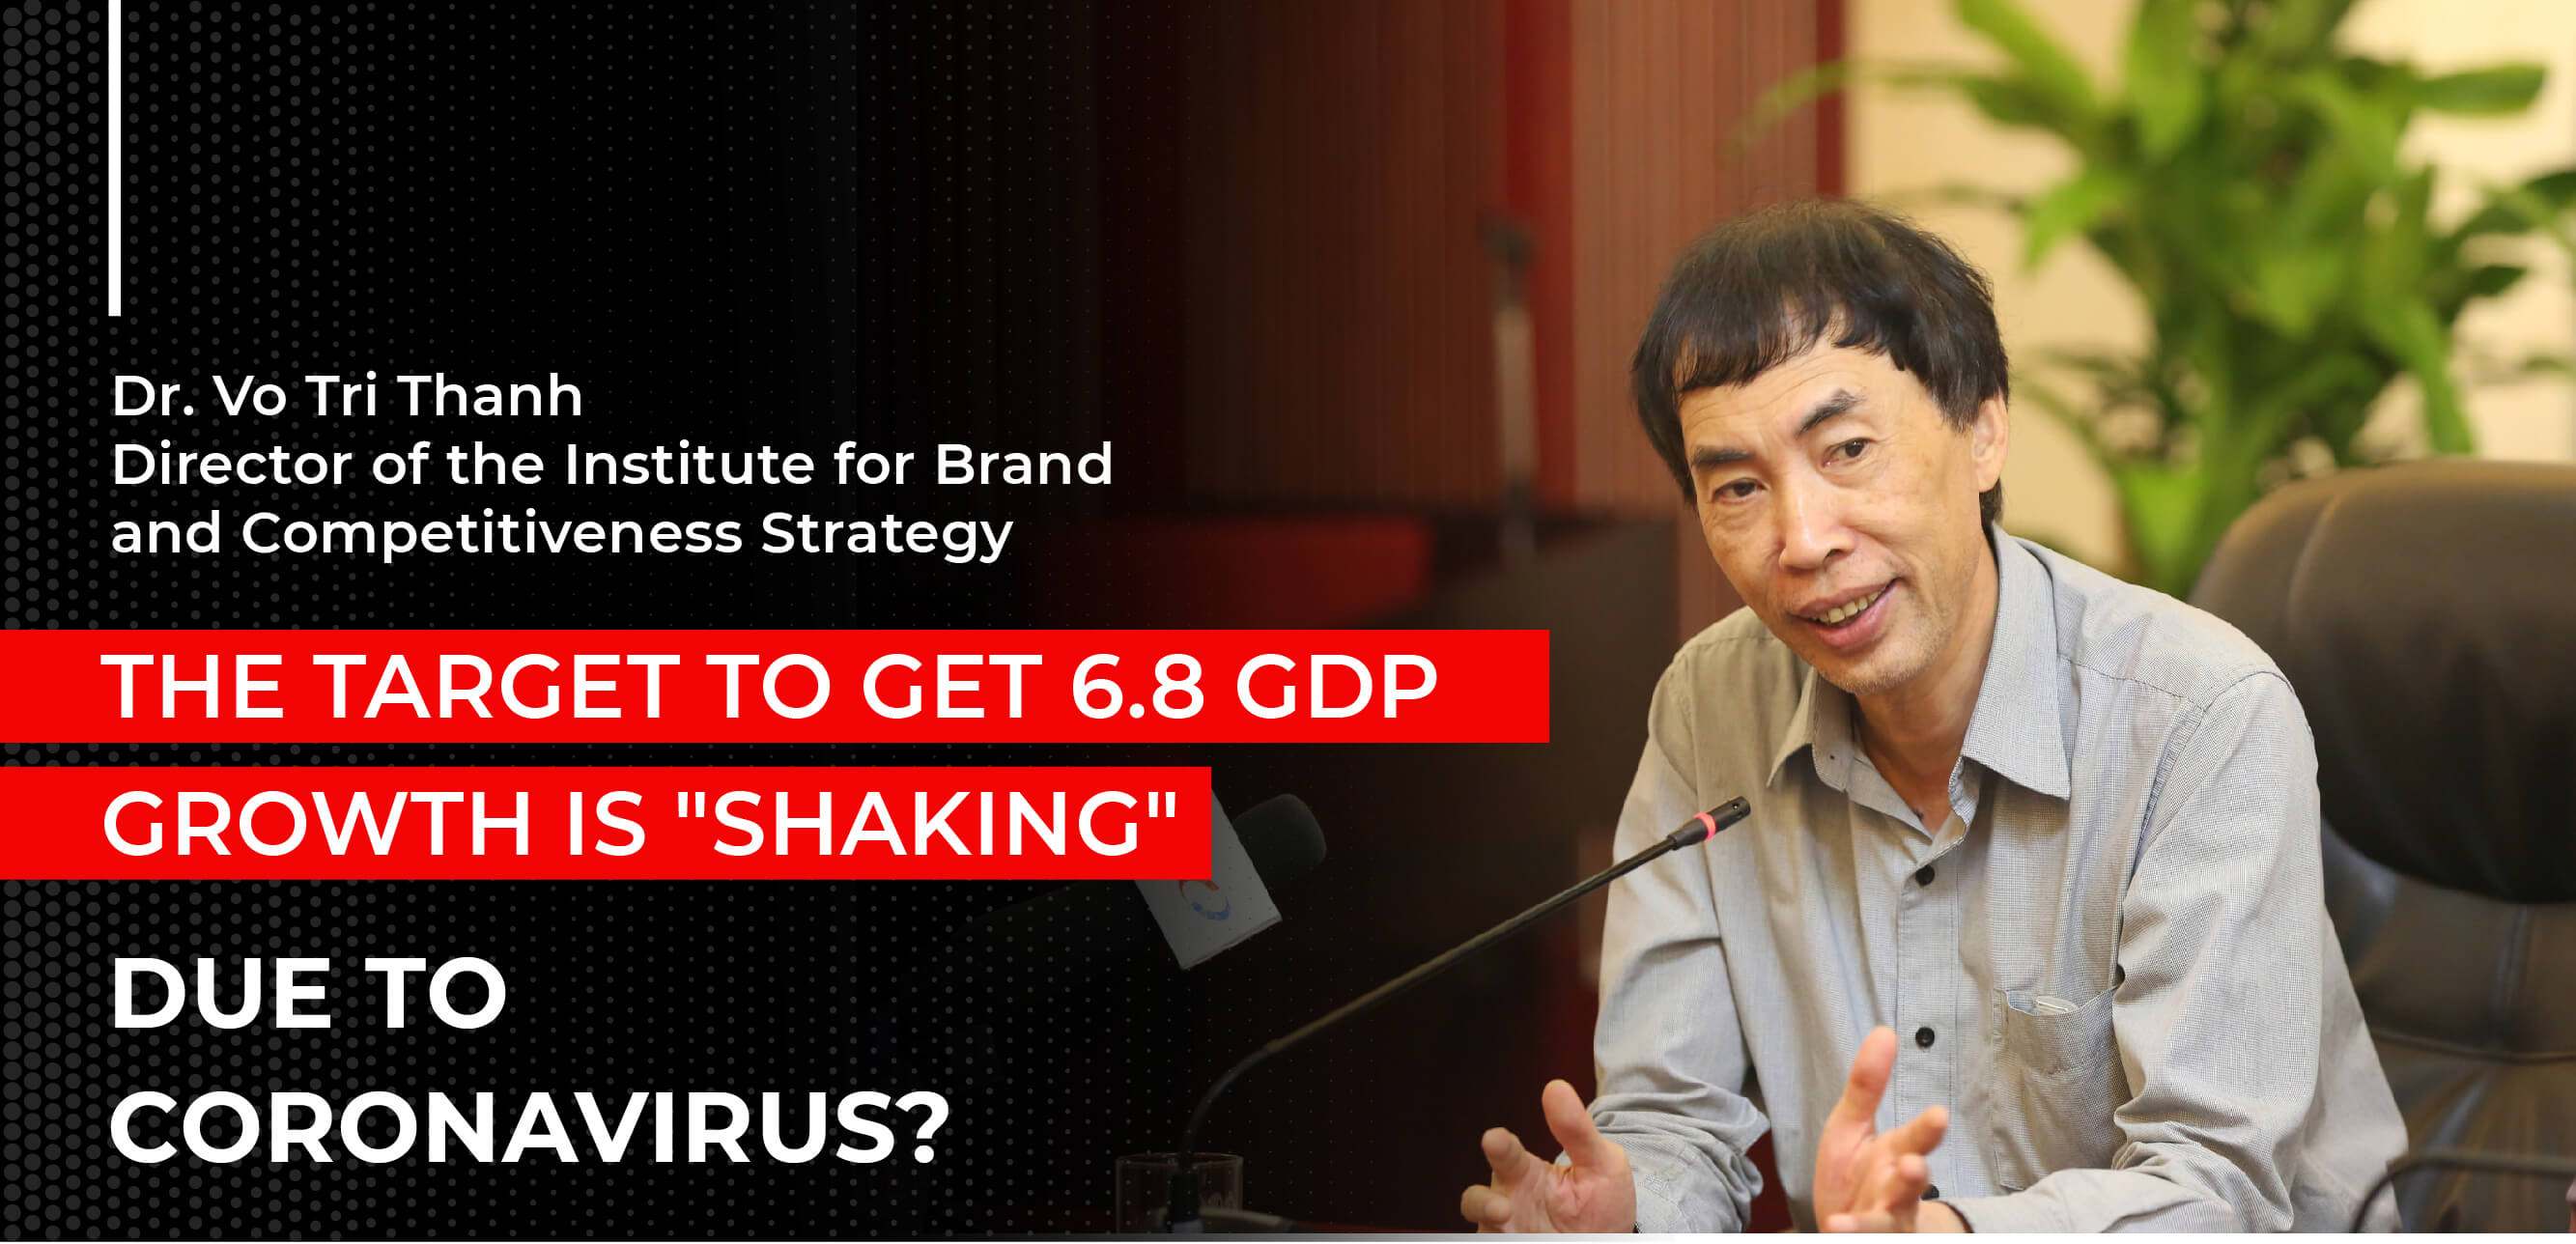 THE TARGET TO GET 6.8 GDP GROWTH IS "SHAKING"  DUE TO CORONAVIRUS?